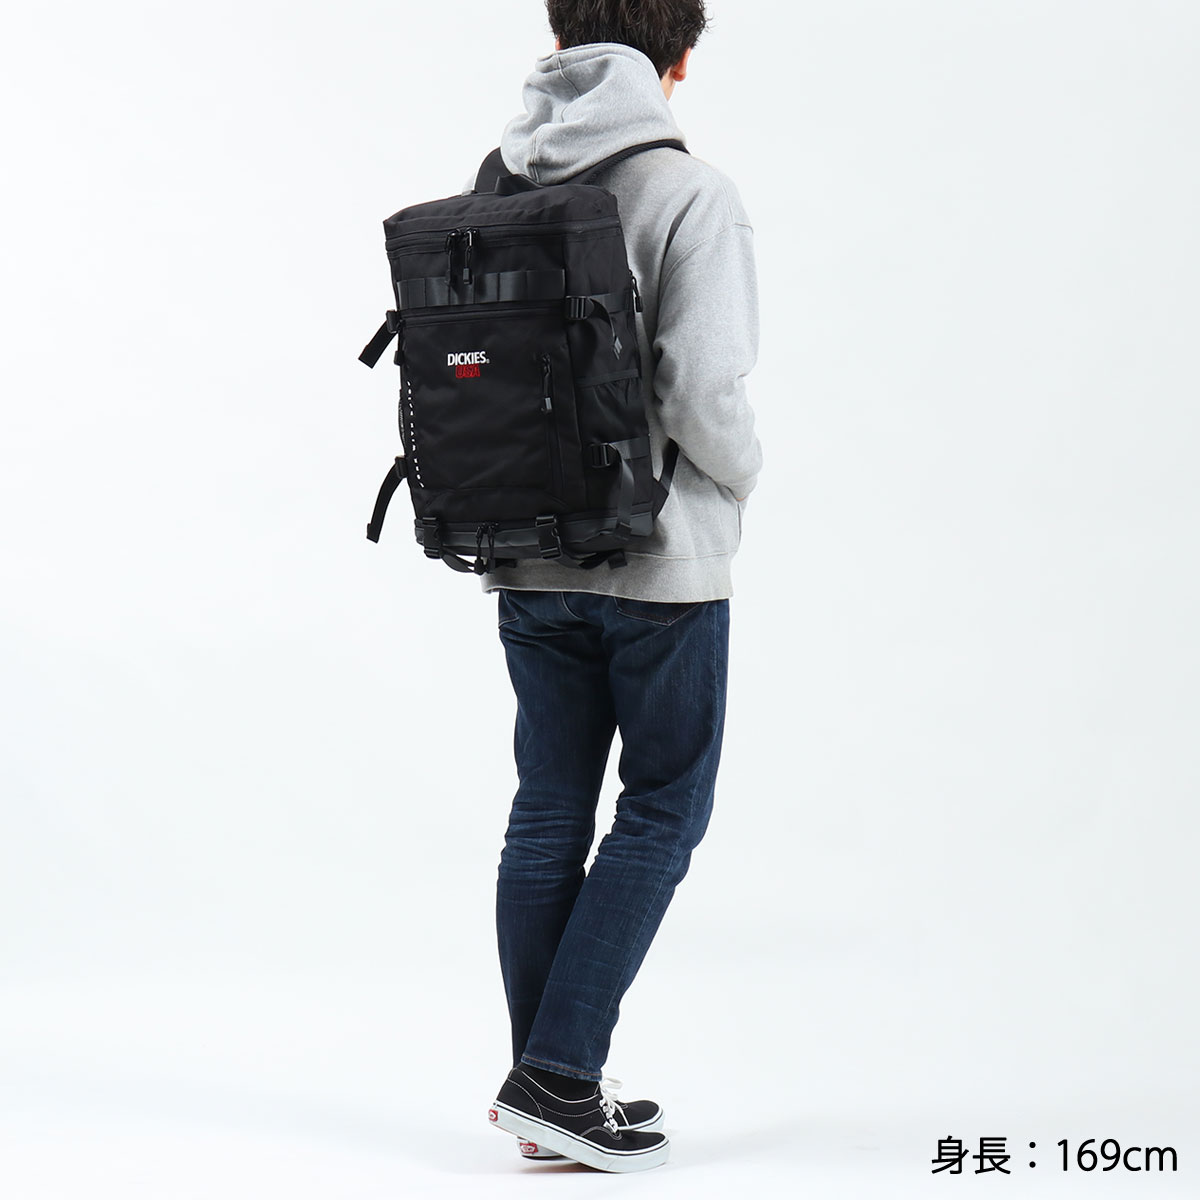 Dickies ディッキーズ USA EMB BOX BACKPACK リュックサック 14738600